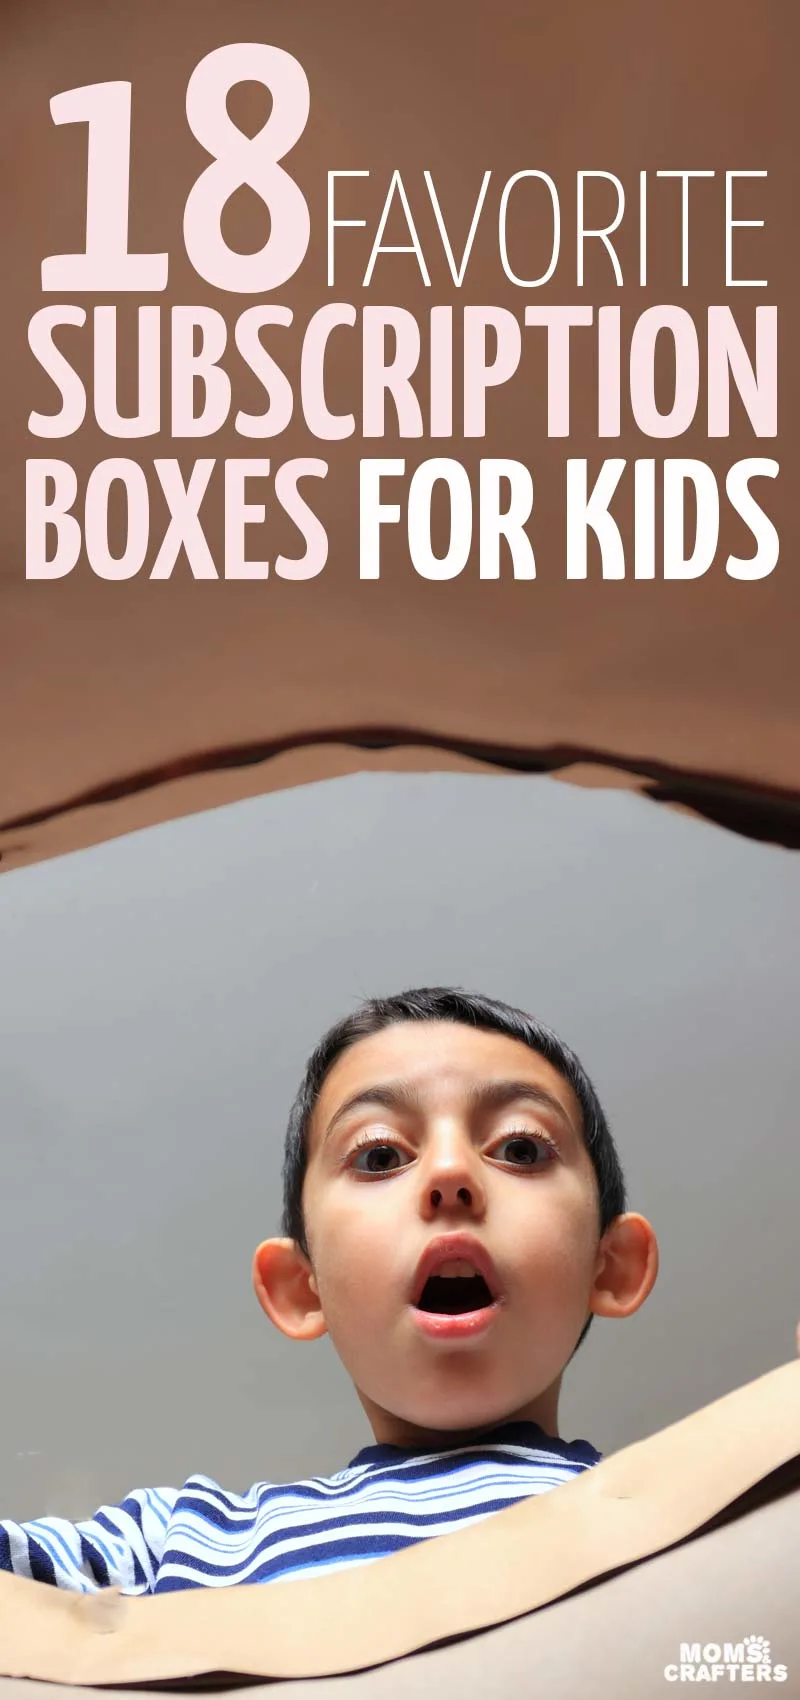 You'll love these awesome ideas for subscription boxes for kids - including books, toys, clothing, and other non-toy gift ideas for babies toddlers preschoolers - and even teenagers! These holiday gift ideas are great for birthday gifts too and year round - because they keep on giving! They include gifts for crafters too! #giftideas #christmas #gifts